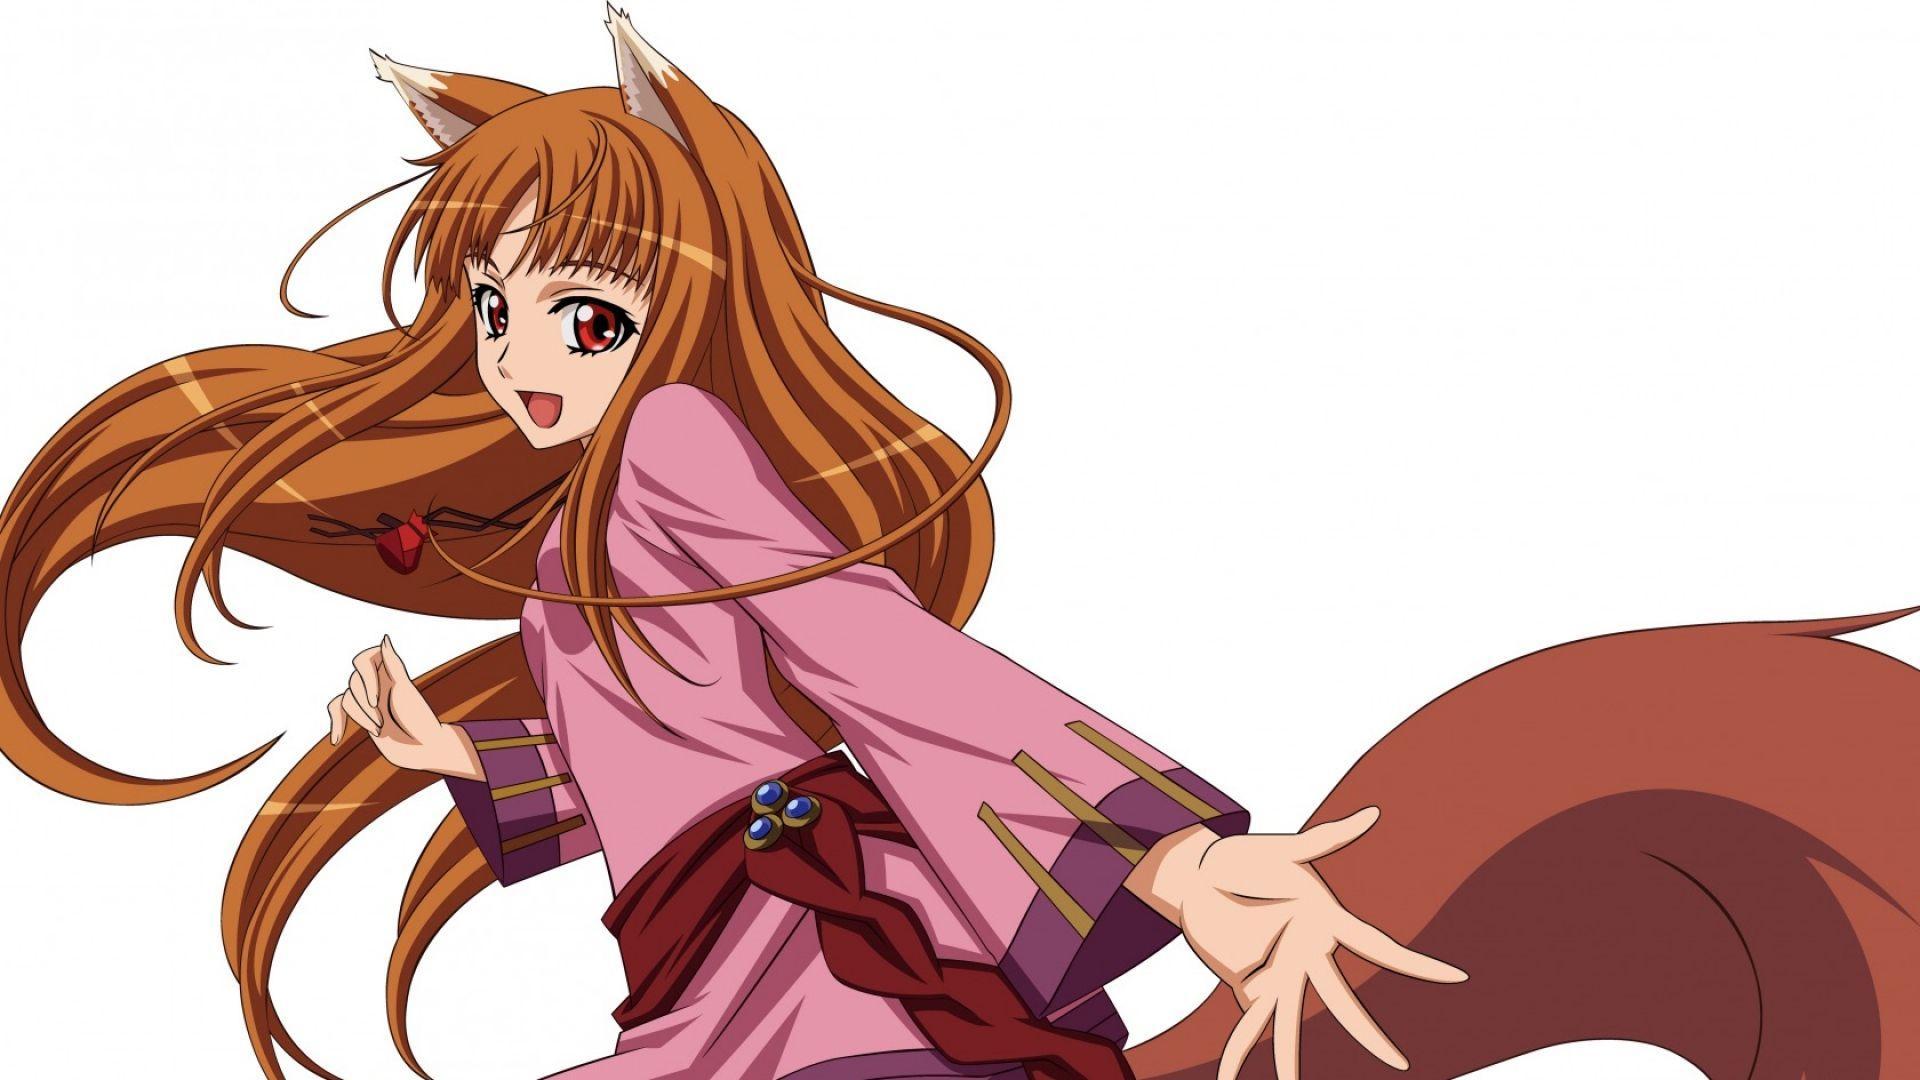 Full HD 1080p Spice and wolf Wallpaper HD, Desktop Background